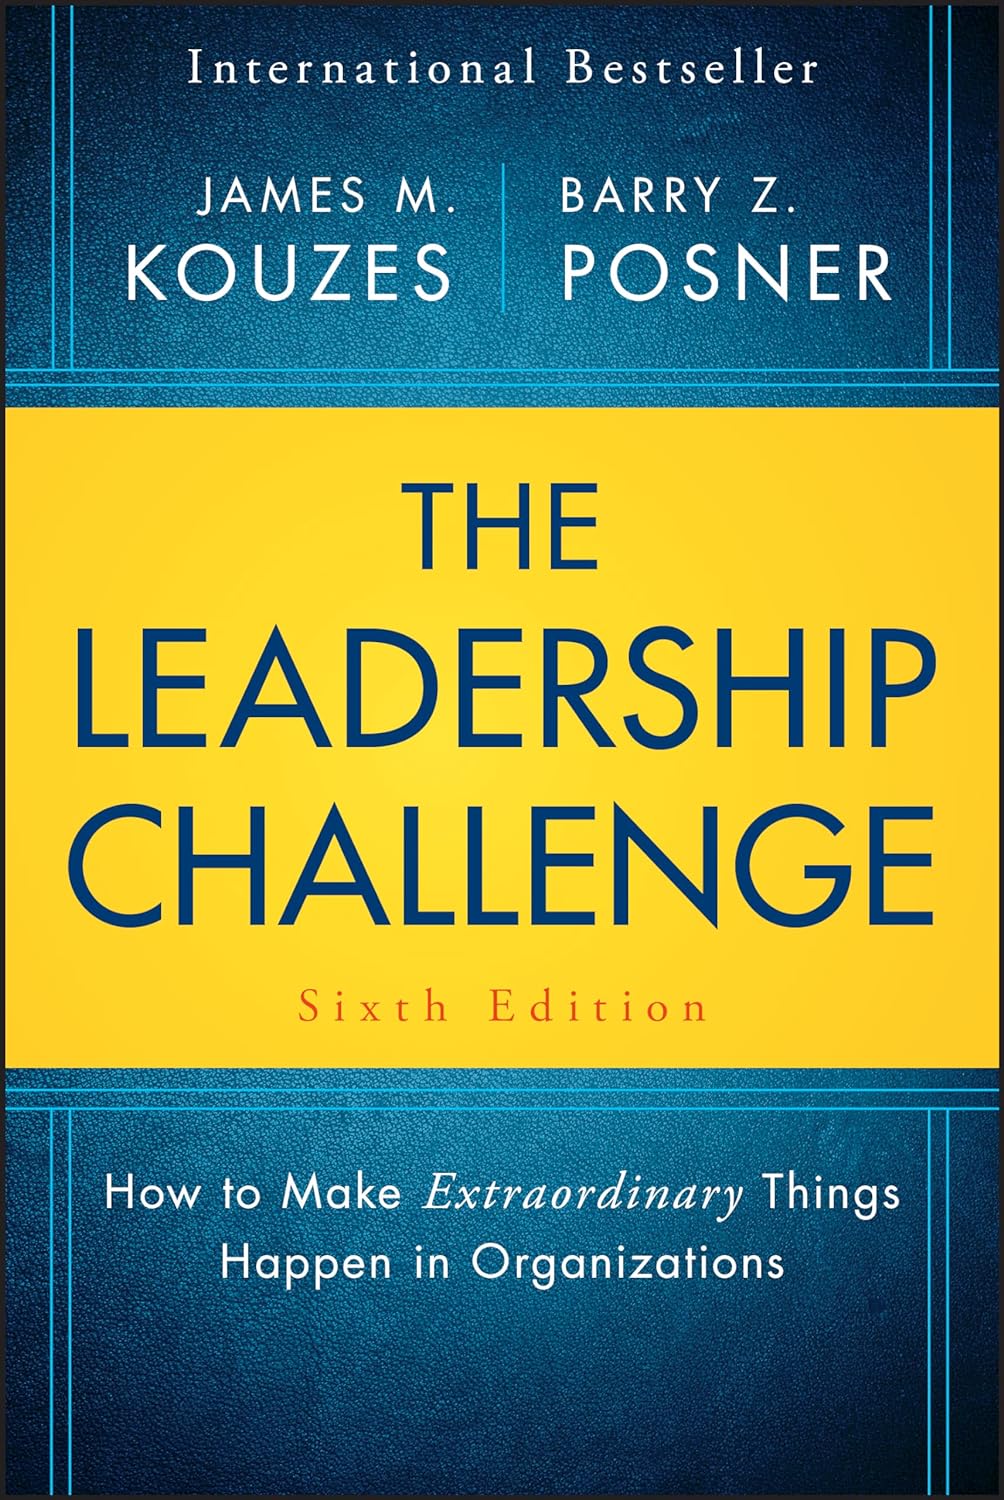 books about servant leadership14